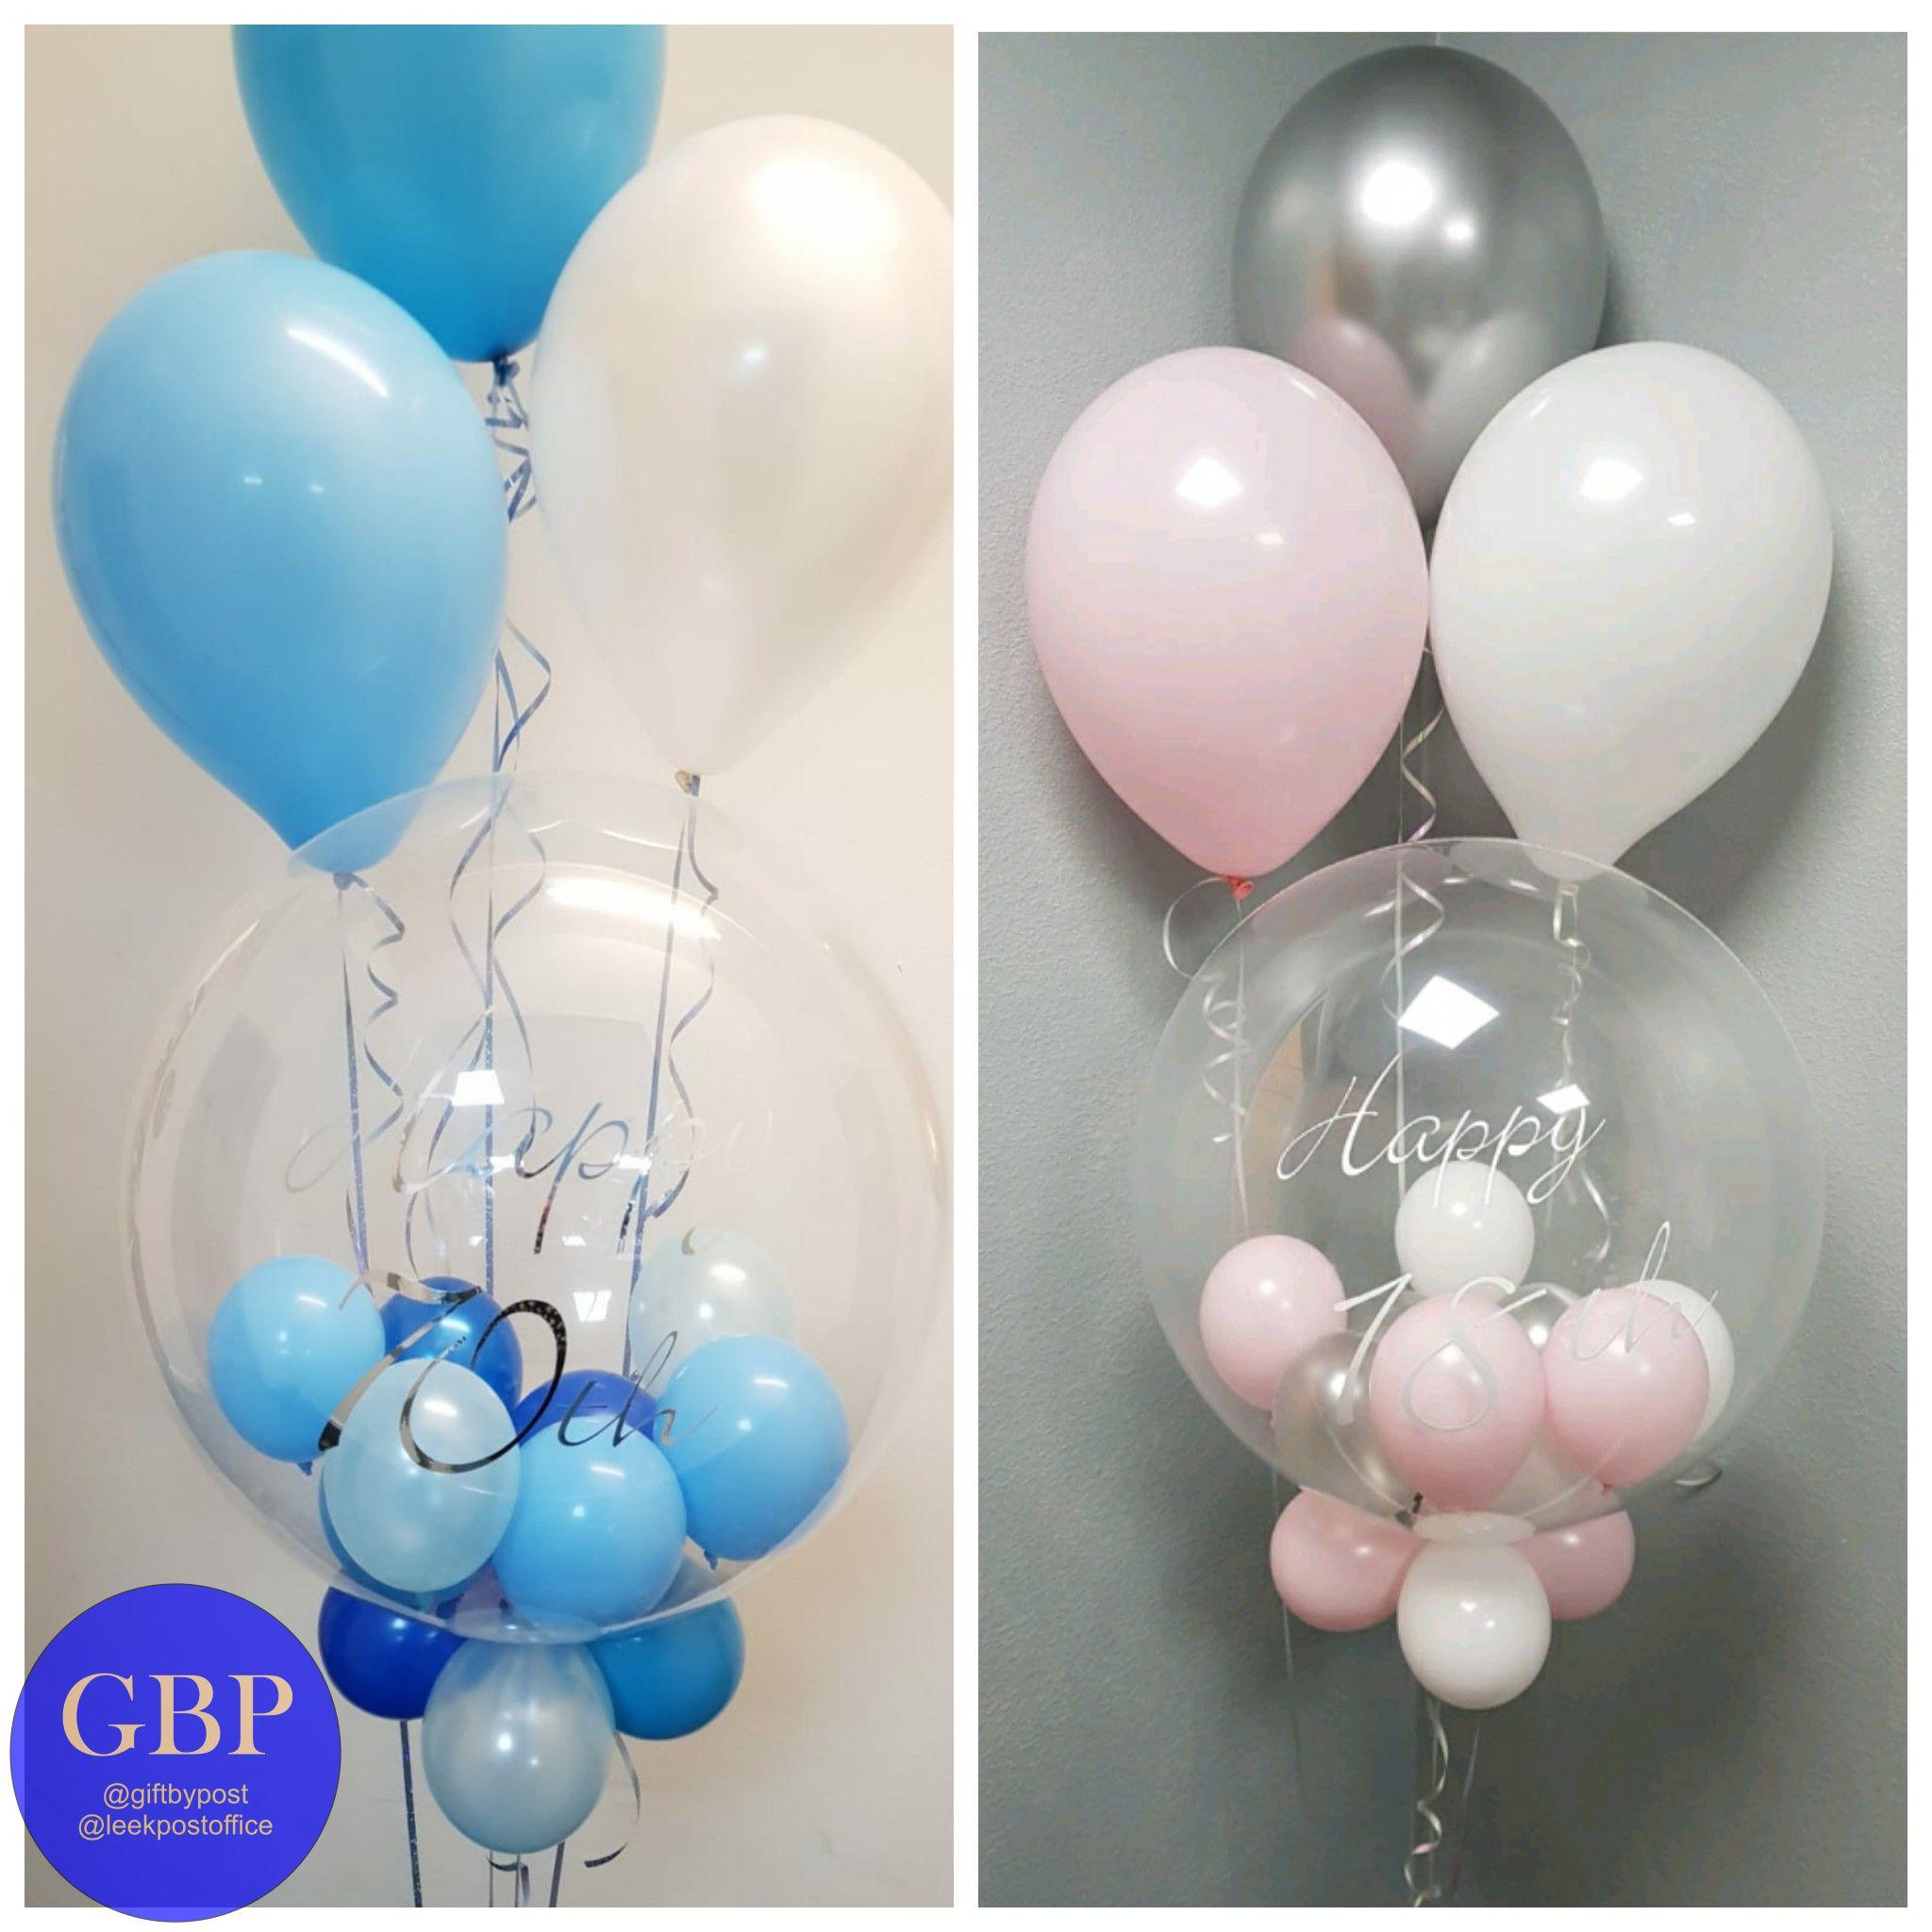 Bubble balloon, contains small balloons, personalised, pink, silver, white, blue, additional latex balloons, milestone birthday